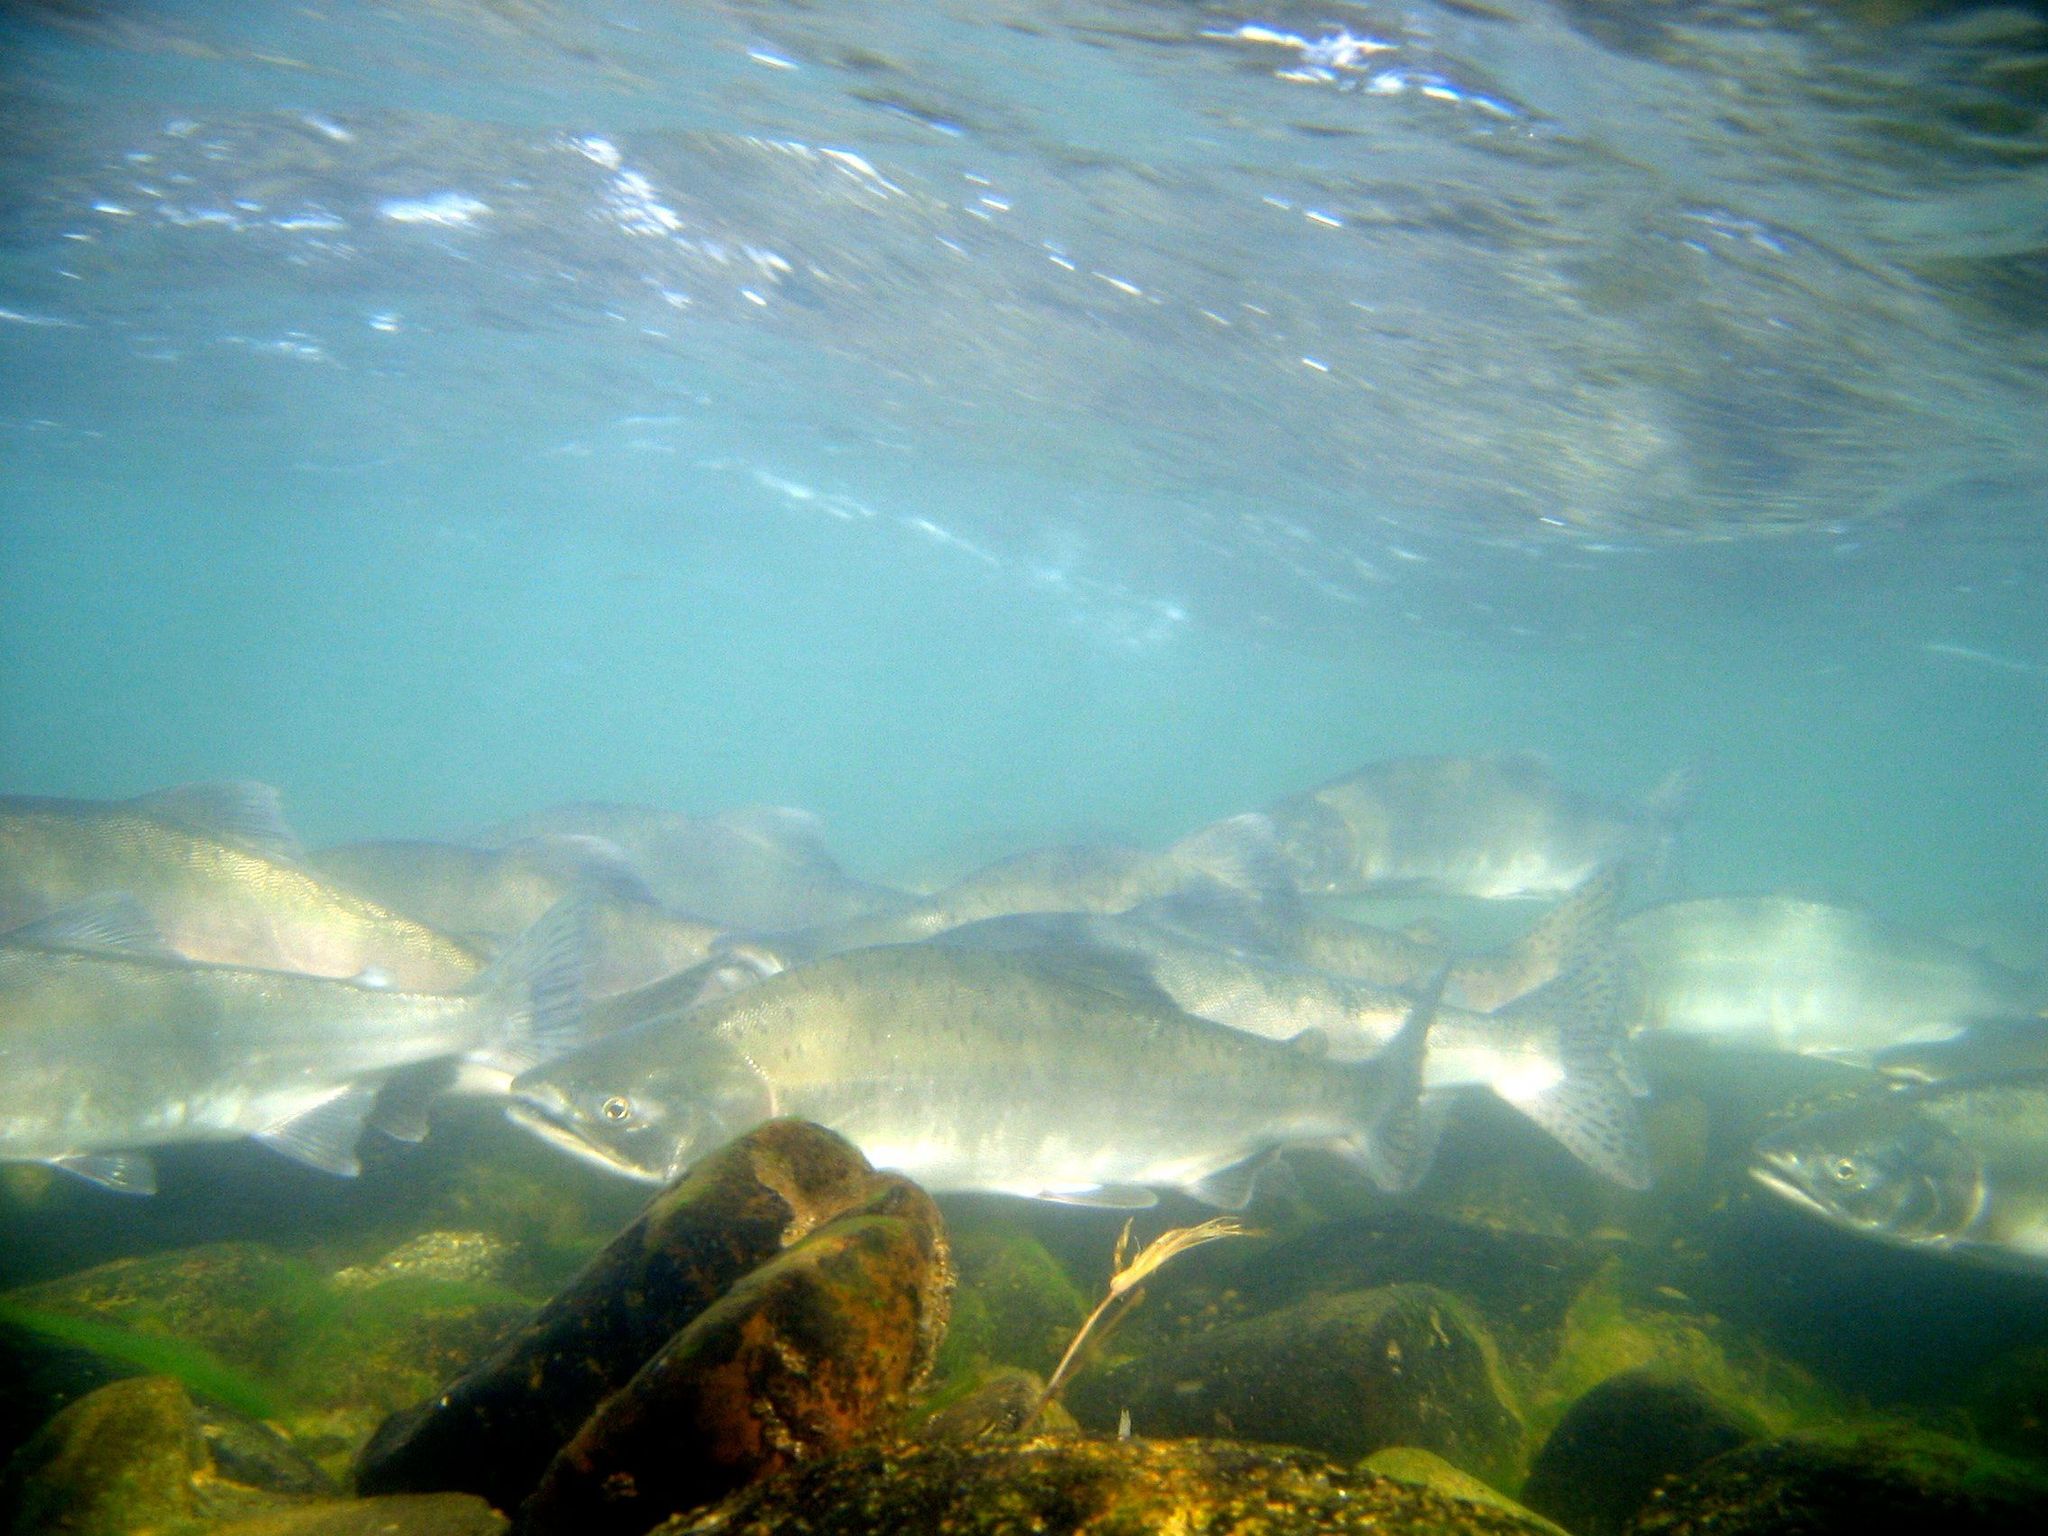 Each summer, hundreds of thousands of salmon return to the Alagnak watershed to spawn.